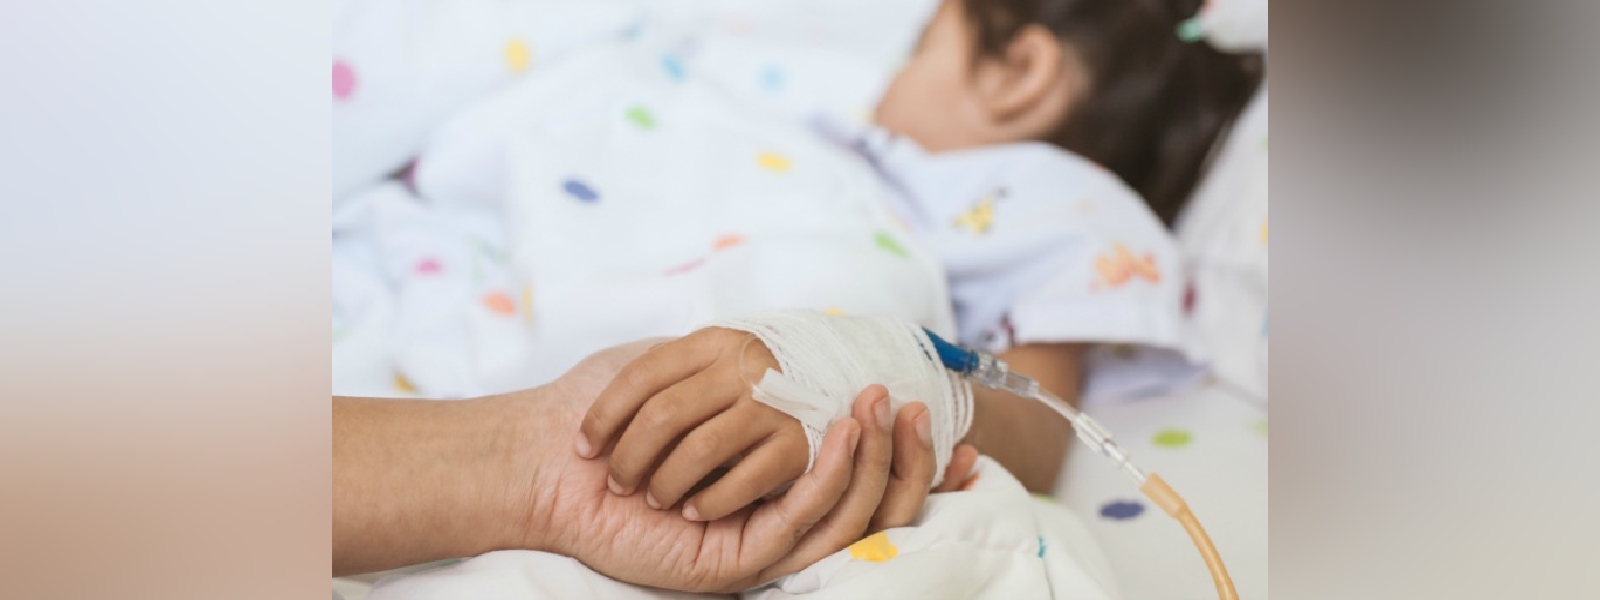 Hospitalization of children on the rise